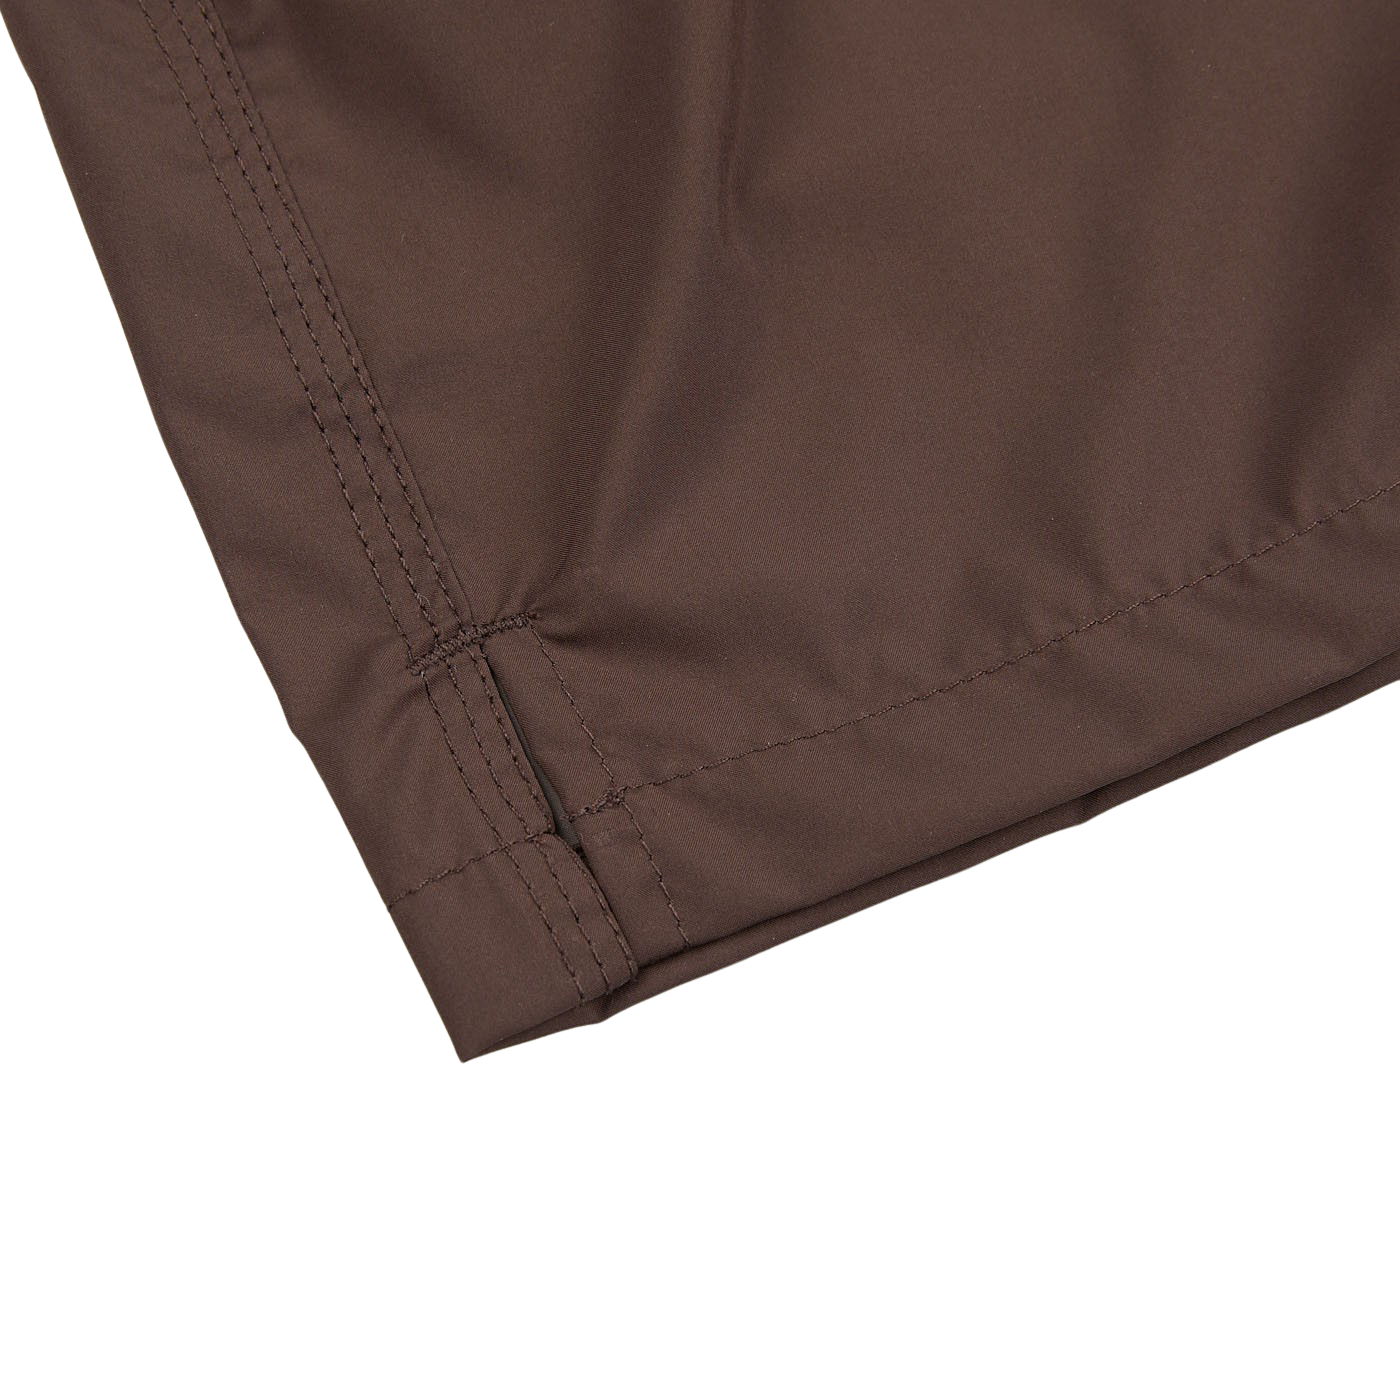 A close up of Fedeli Dark Brown Microfiber Madeira Swim Shorts, a luxury casual wear, on a white surface.